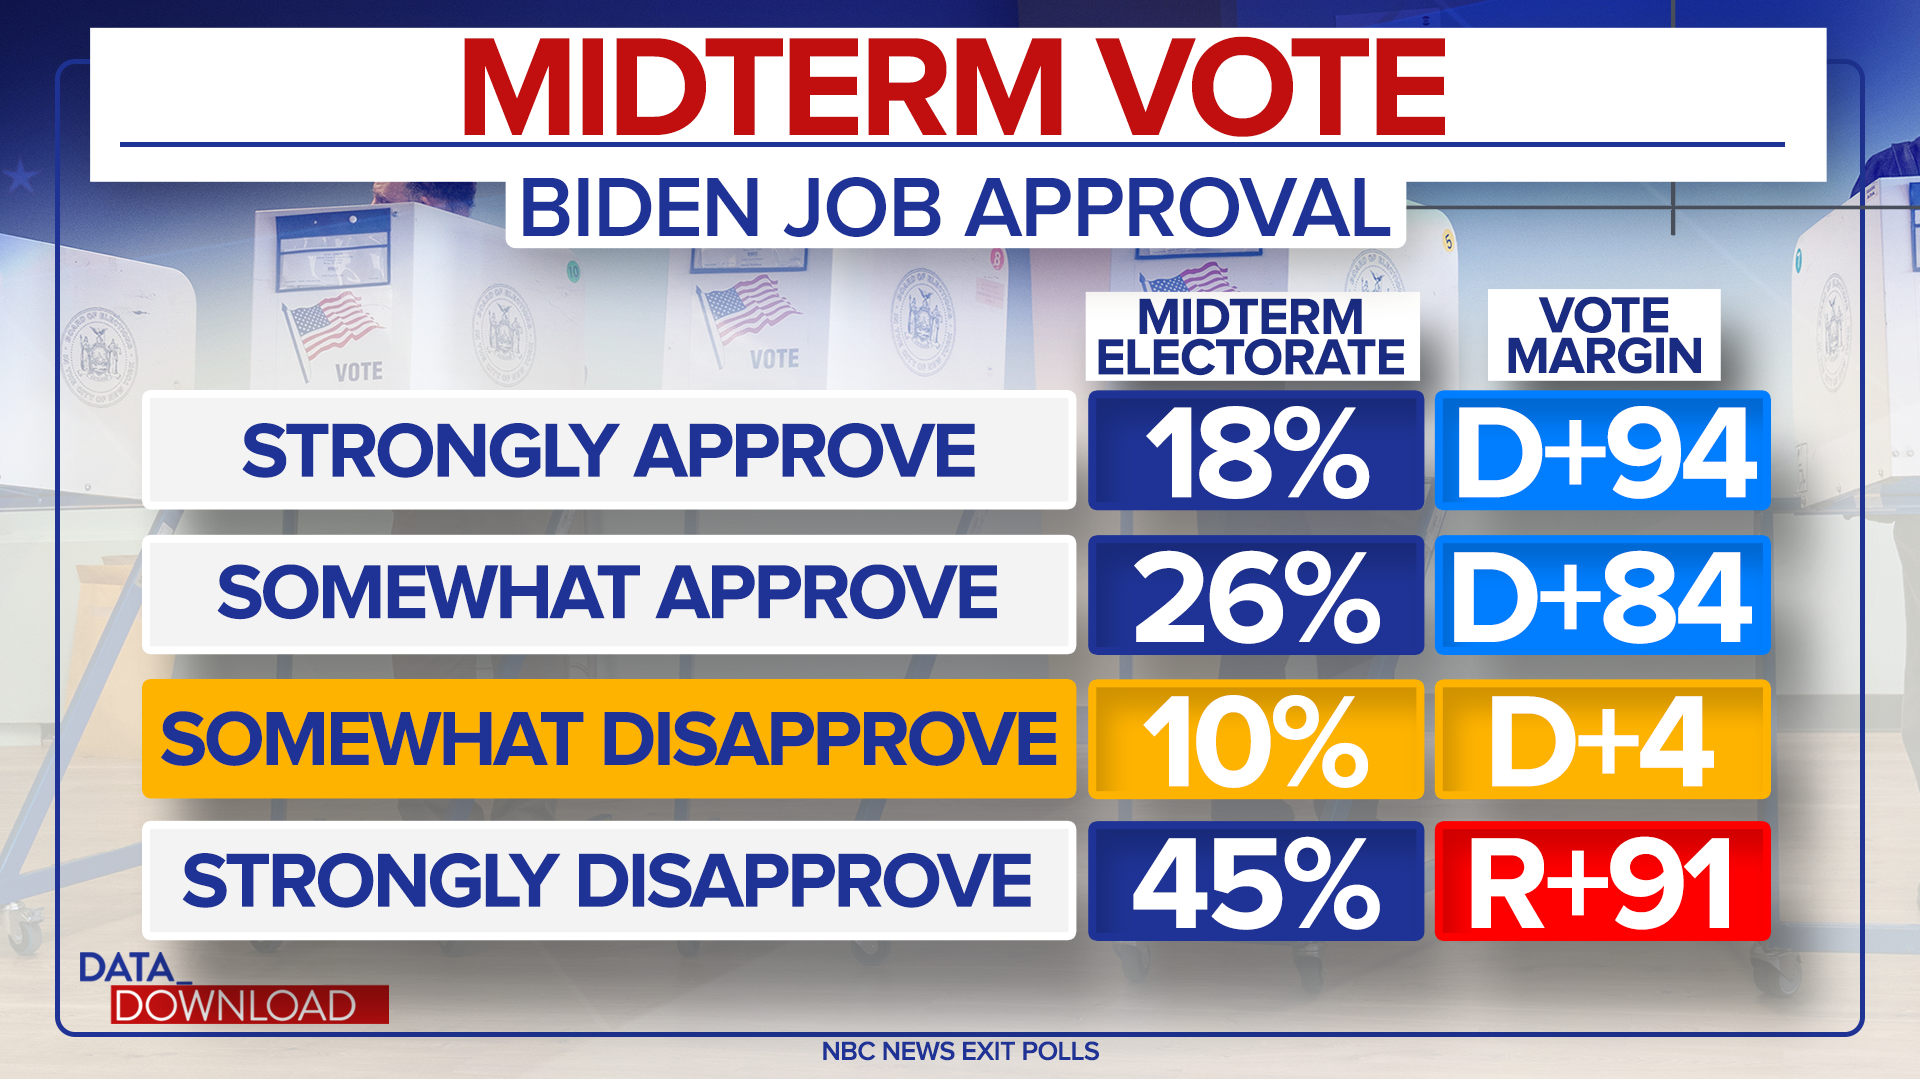 For answers look to voters who somewhat disapprove of Biden